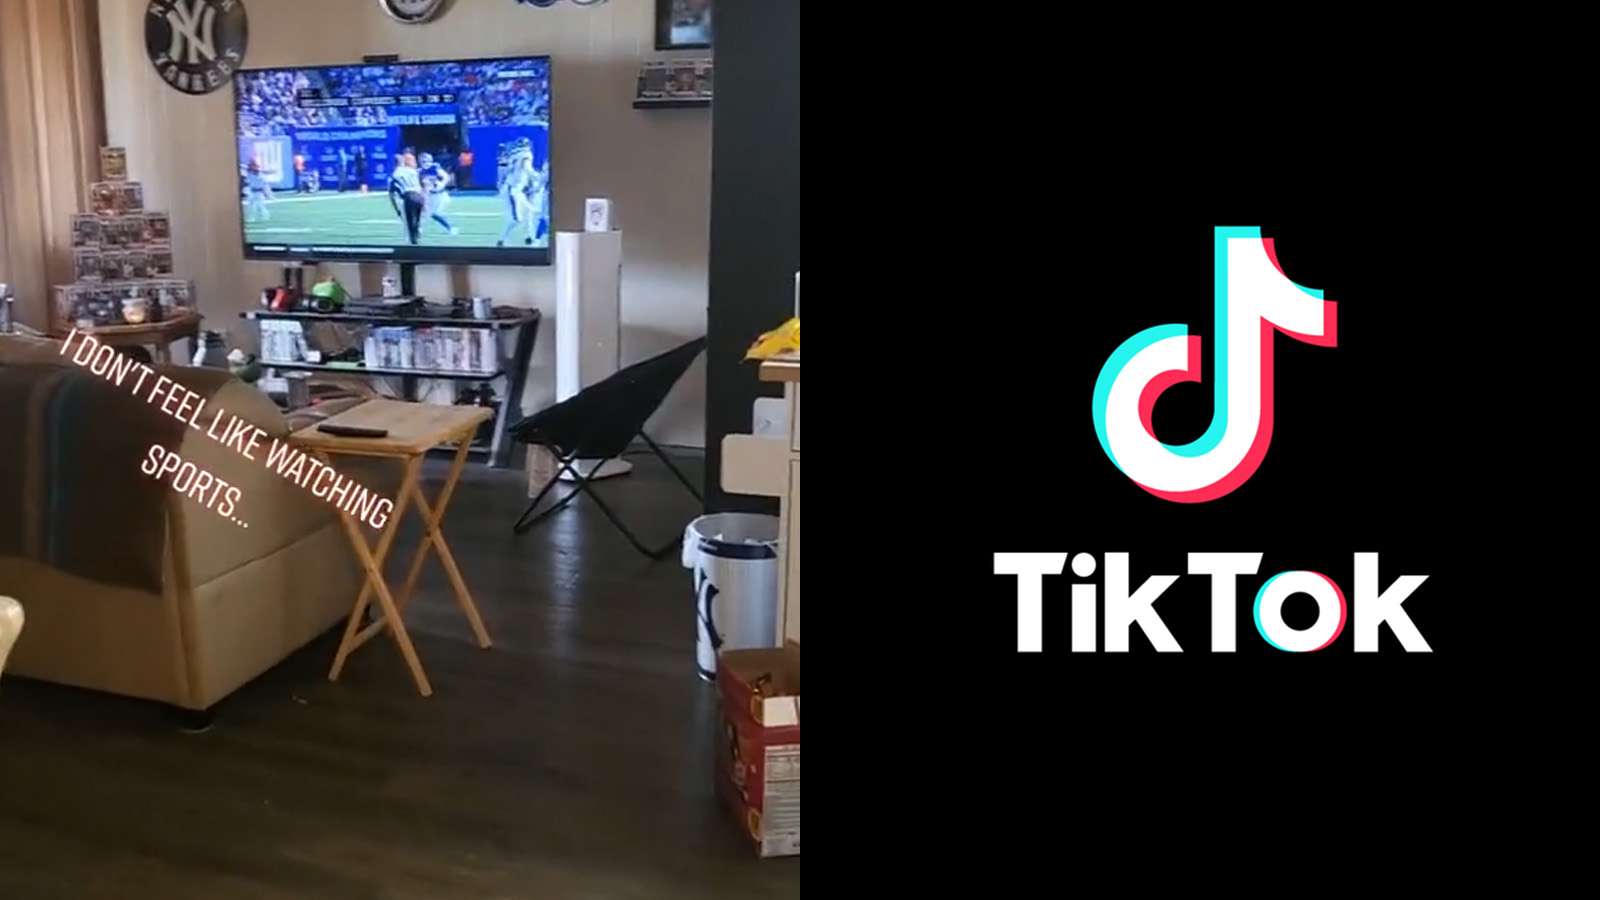 TikTok logo on the right, thefemale13's video on the left